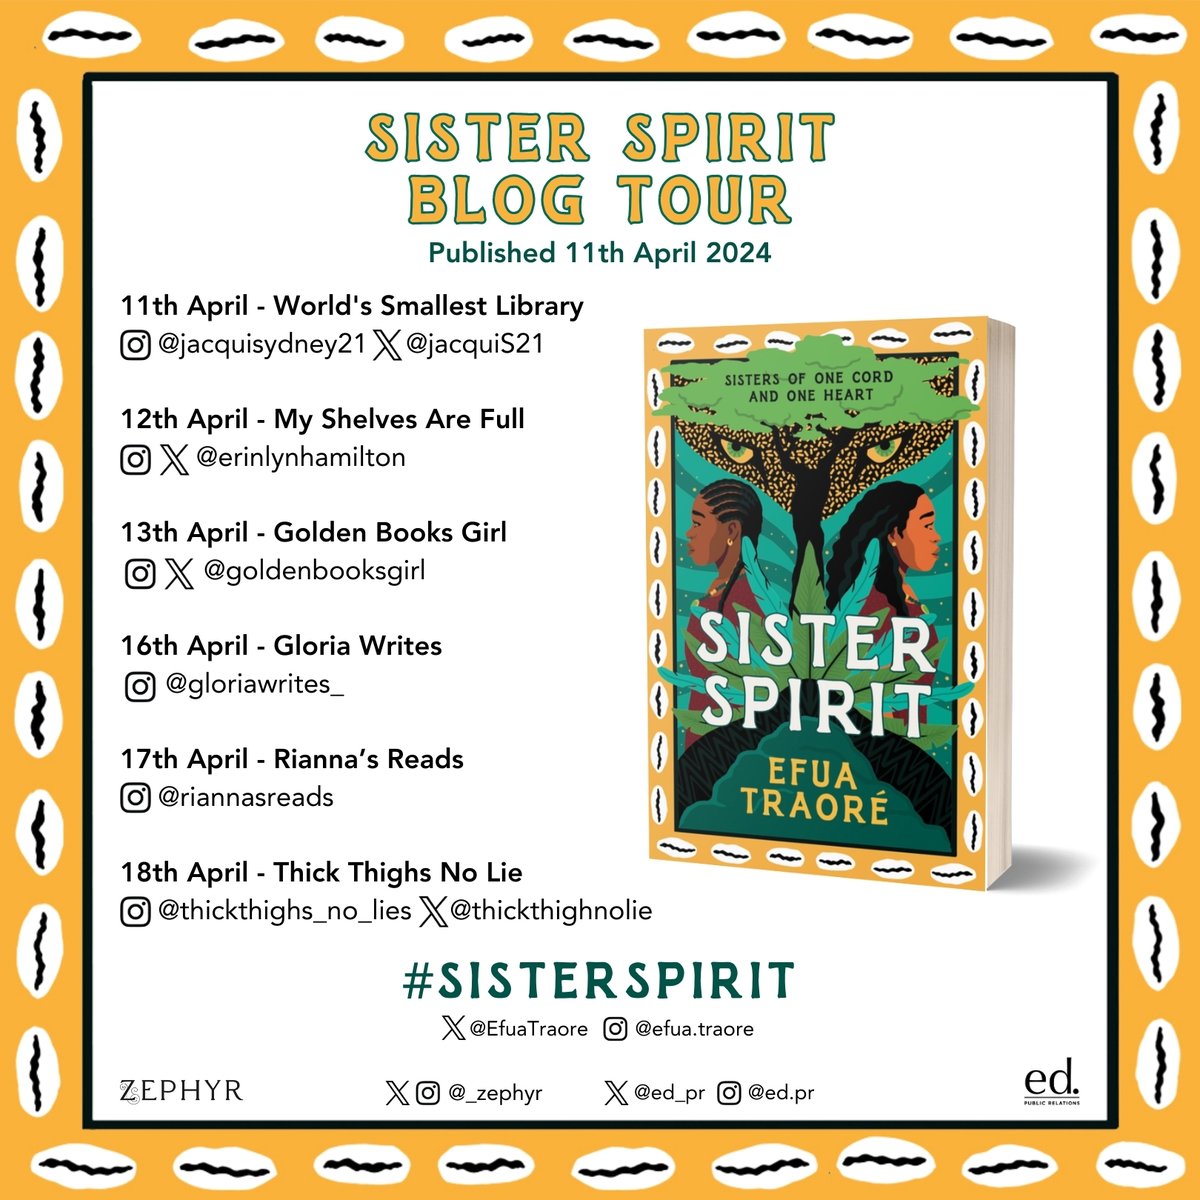 The blog tour for #SisterSpirit by @EfuaTraore is just around the corner! Keep an eye on the wonderful bloggers pages to read their thoughts on this young adult supernatural thriller that blends African myth, friendship, romance and self-discovery 👇📚